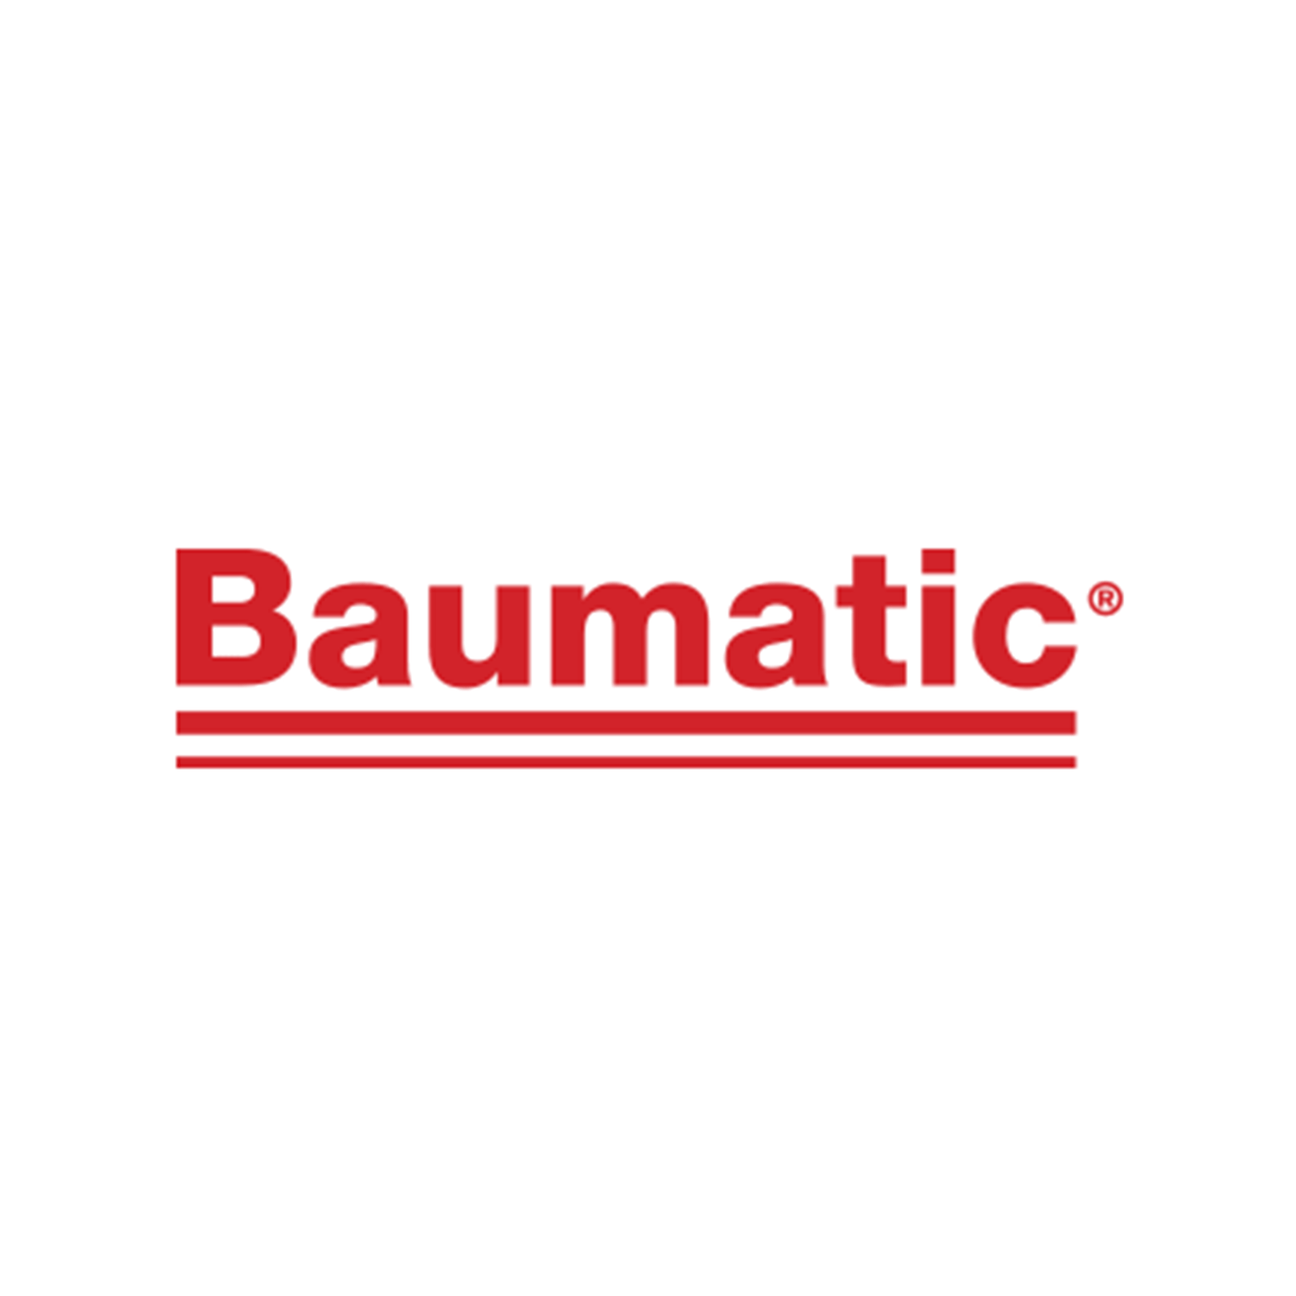 Baumatic - My Oven Spares